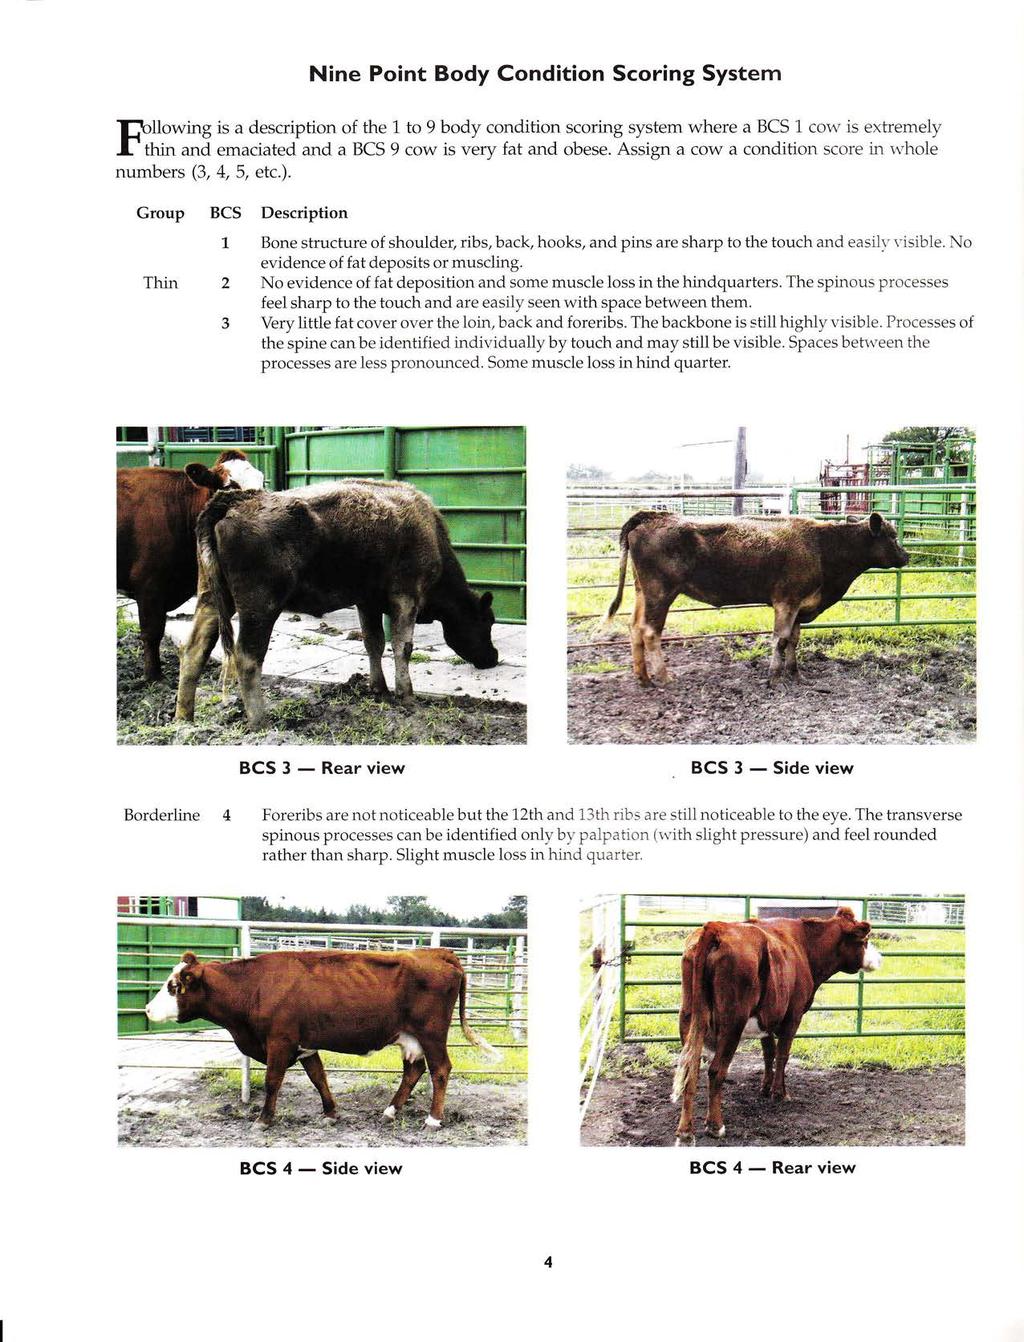 $llowing Nine Point Body Condition Scoring System is a description of the 1 to 9 body condition scoring system where a BCS 1 cow is extremely I-'thin and emaciated and a BCS 9 cow is very fat and